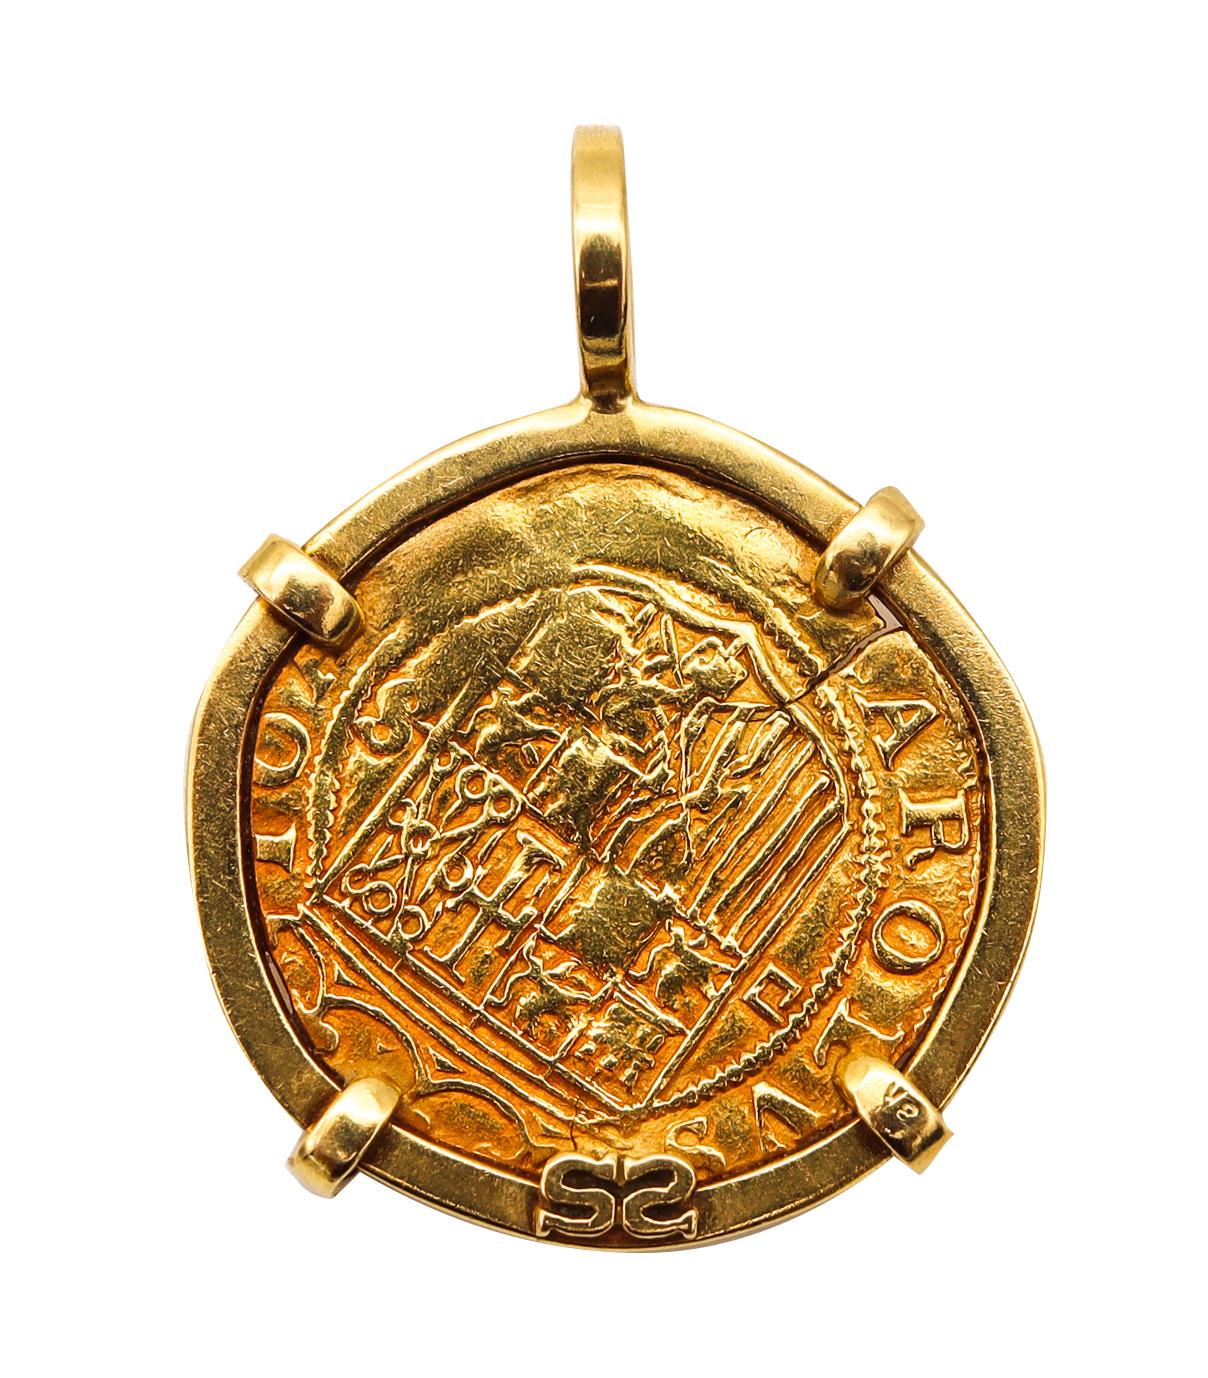 Spanish treasure gold coin pendant.

Beautiful Spanish gold coin of 1 escudo, mounted in a custom made frame crafted in solid 18 karats yellow gold with high polished finish. Fitted on top with a loop bail to wear in a chain or a charms